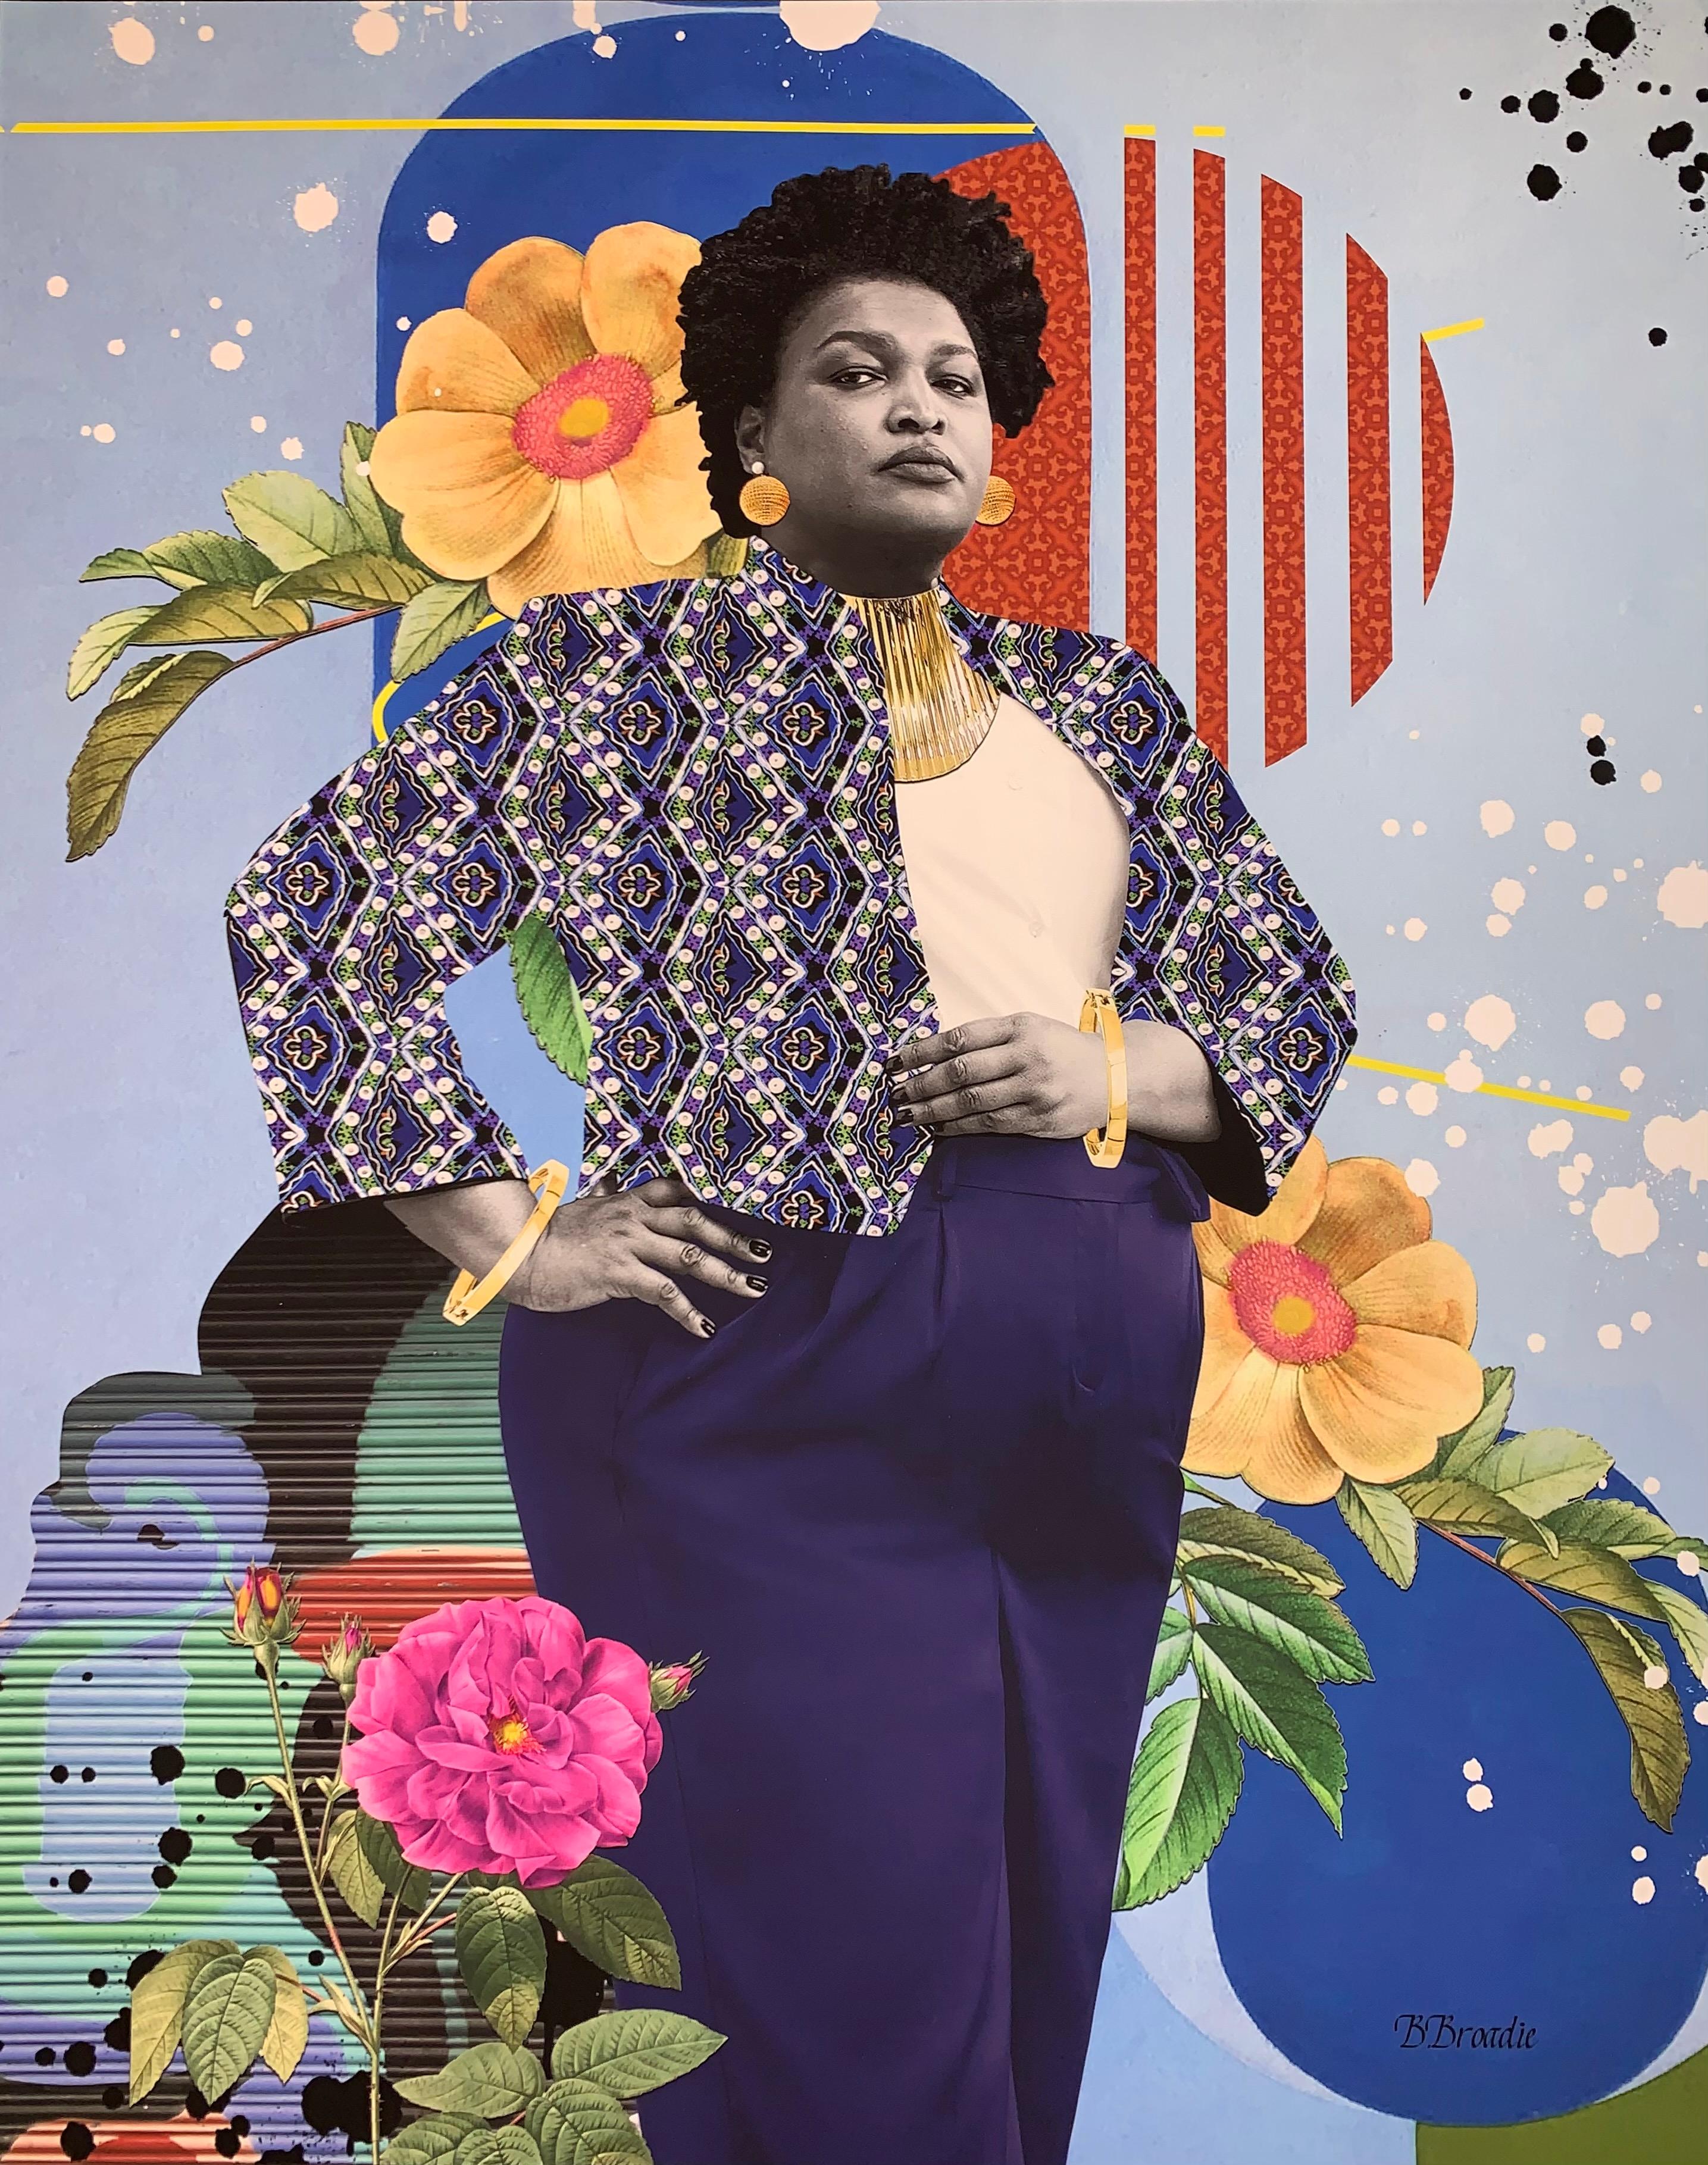 All Blue Everything: A Walk in the Park with Stacey Abrams, 2021
Giclée print on paper
Signed in plate to lower right